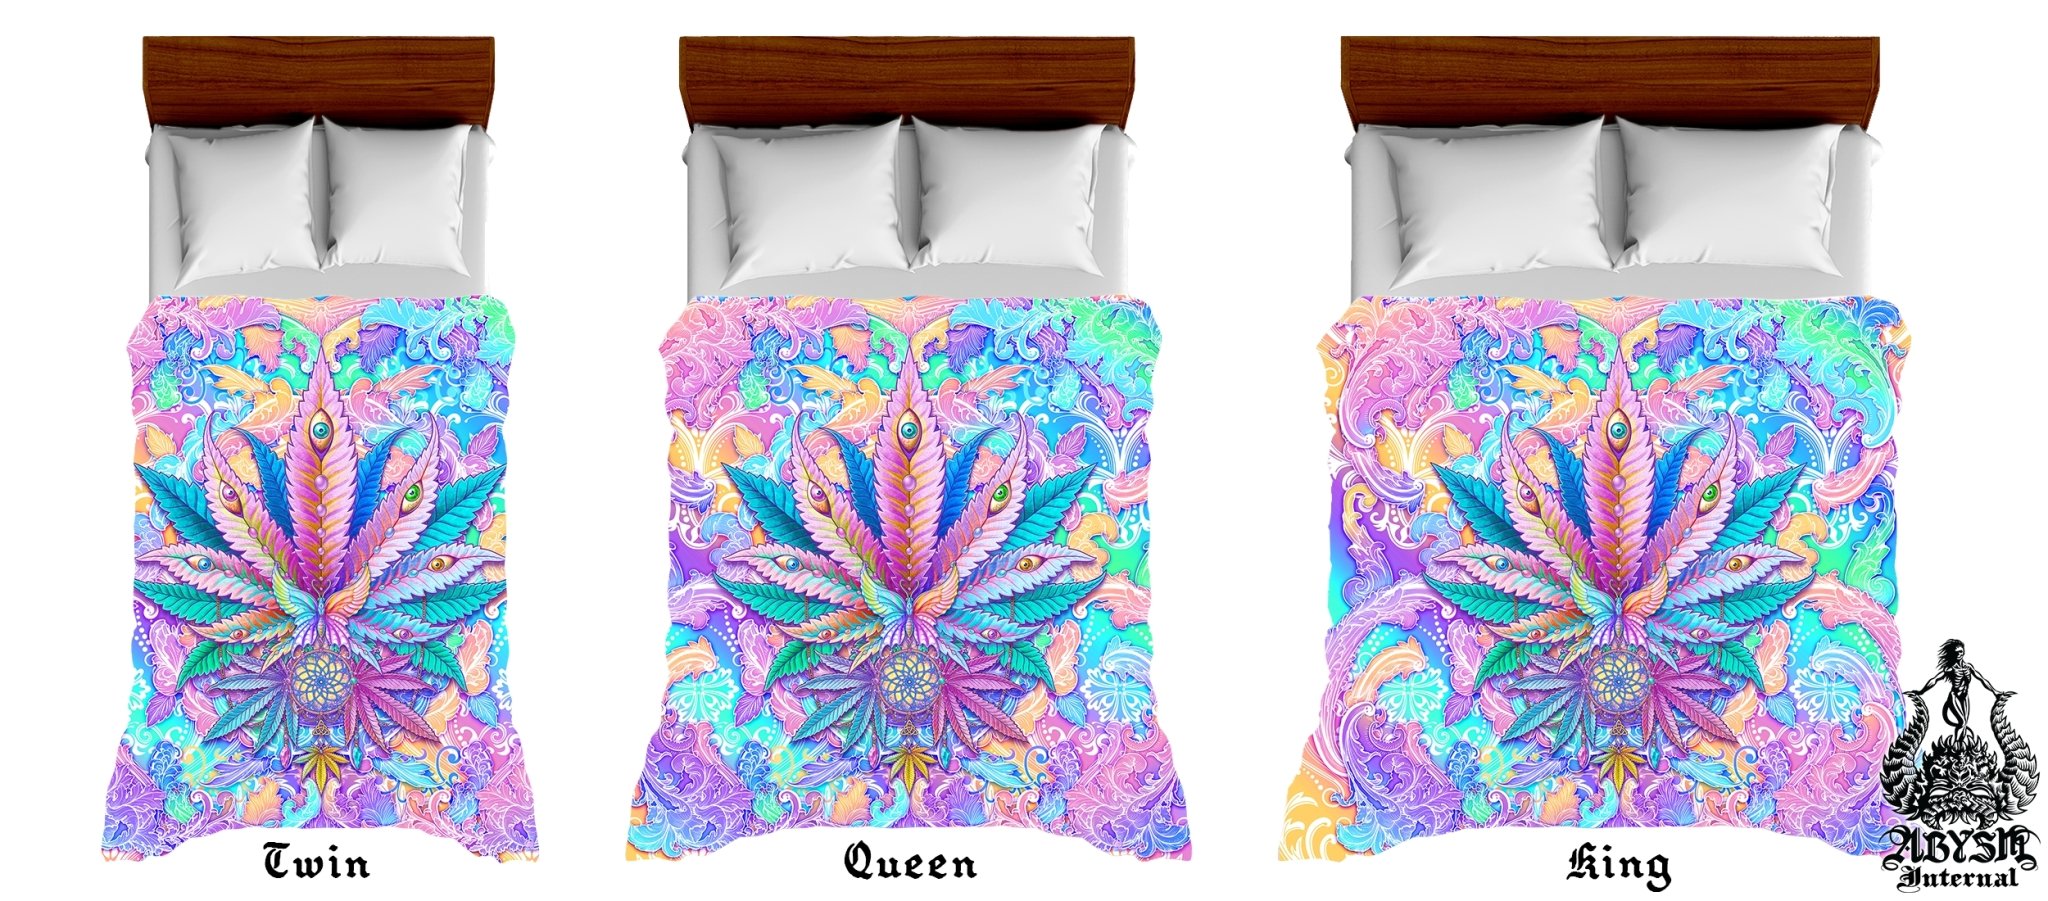 Weed Bedding Set, Comforter and Duvet, Aesthetic Bed Cover, Psychedelic Girl Bedroom Decor, King, Queen and Twin Size, 420 Cannabis Room Art - Marijuana Pastel - Abysm Internal